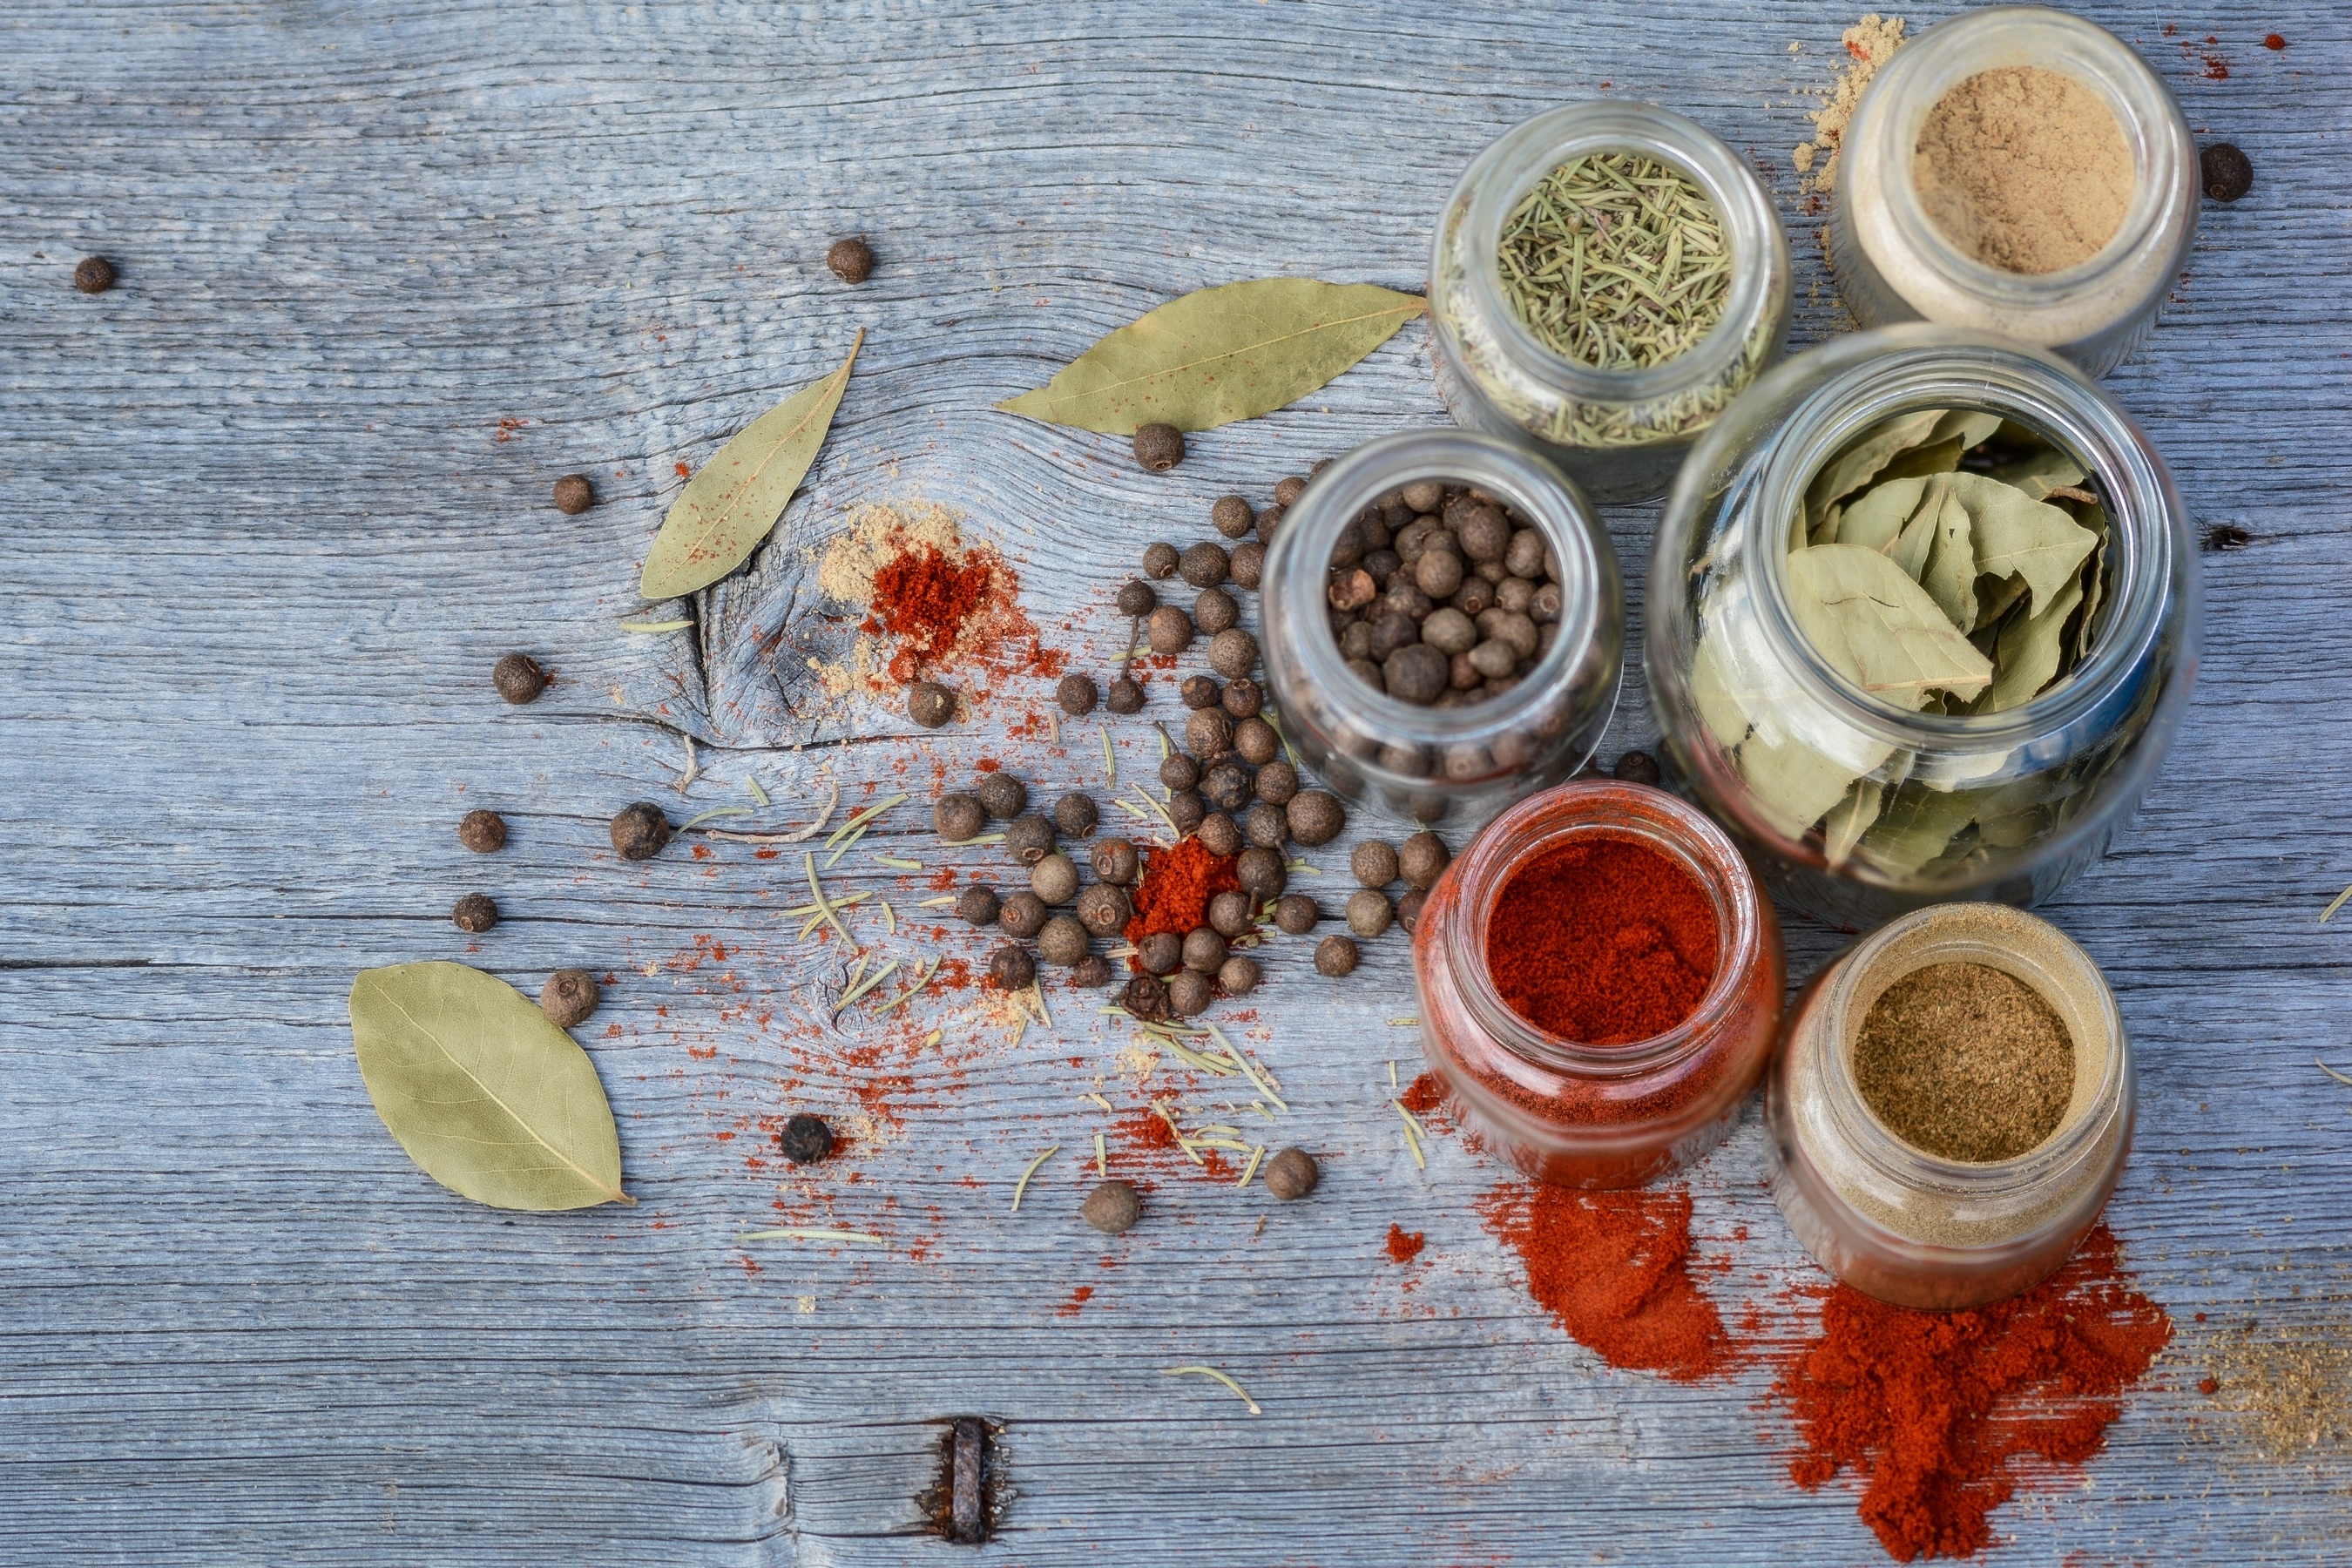 herbs and spices, food, herbs, jar, spices